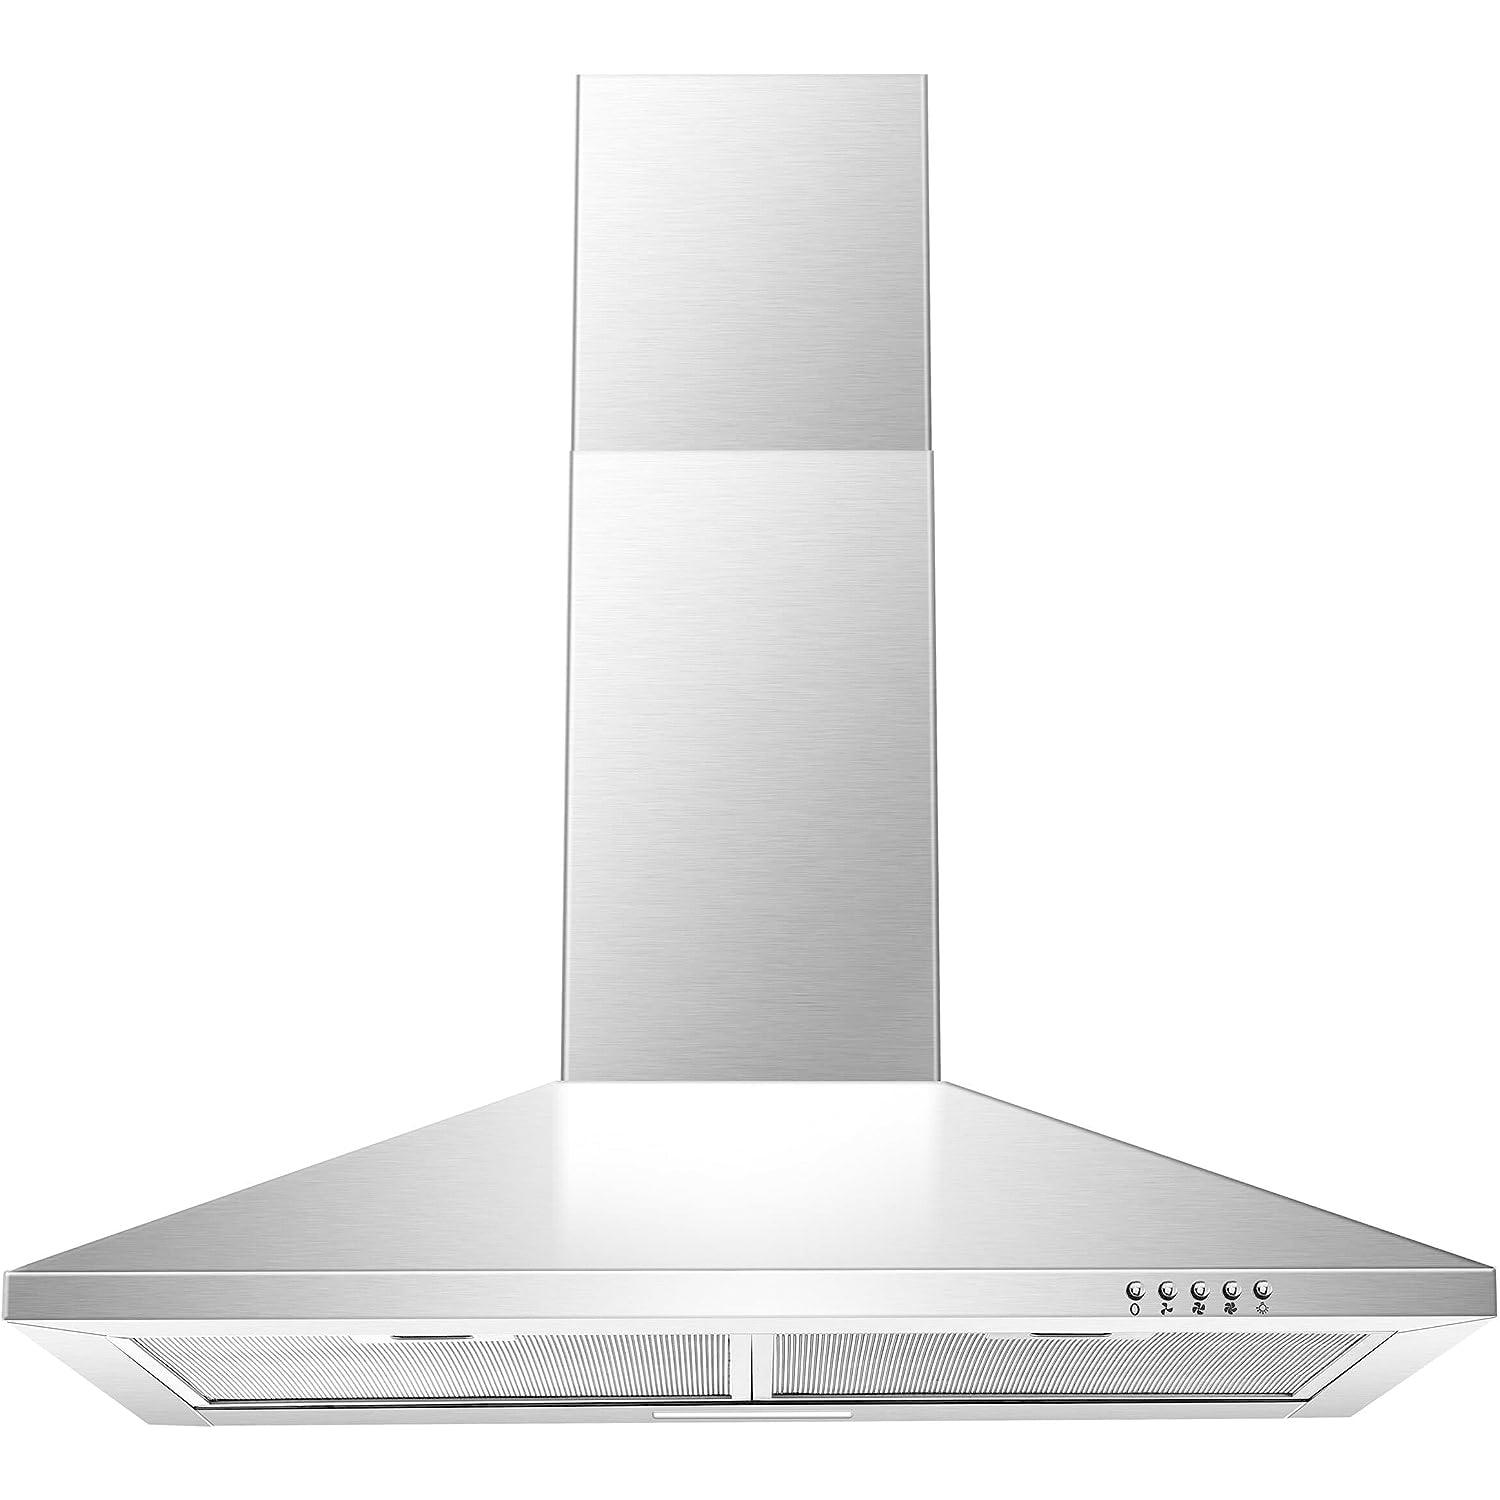 Tieasy 30 Inch Wall Mount 450 CFM Range Hood in Stainless Steel with Ducted/Ductless- US1001G75A